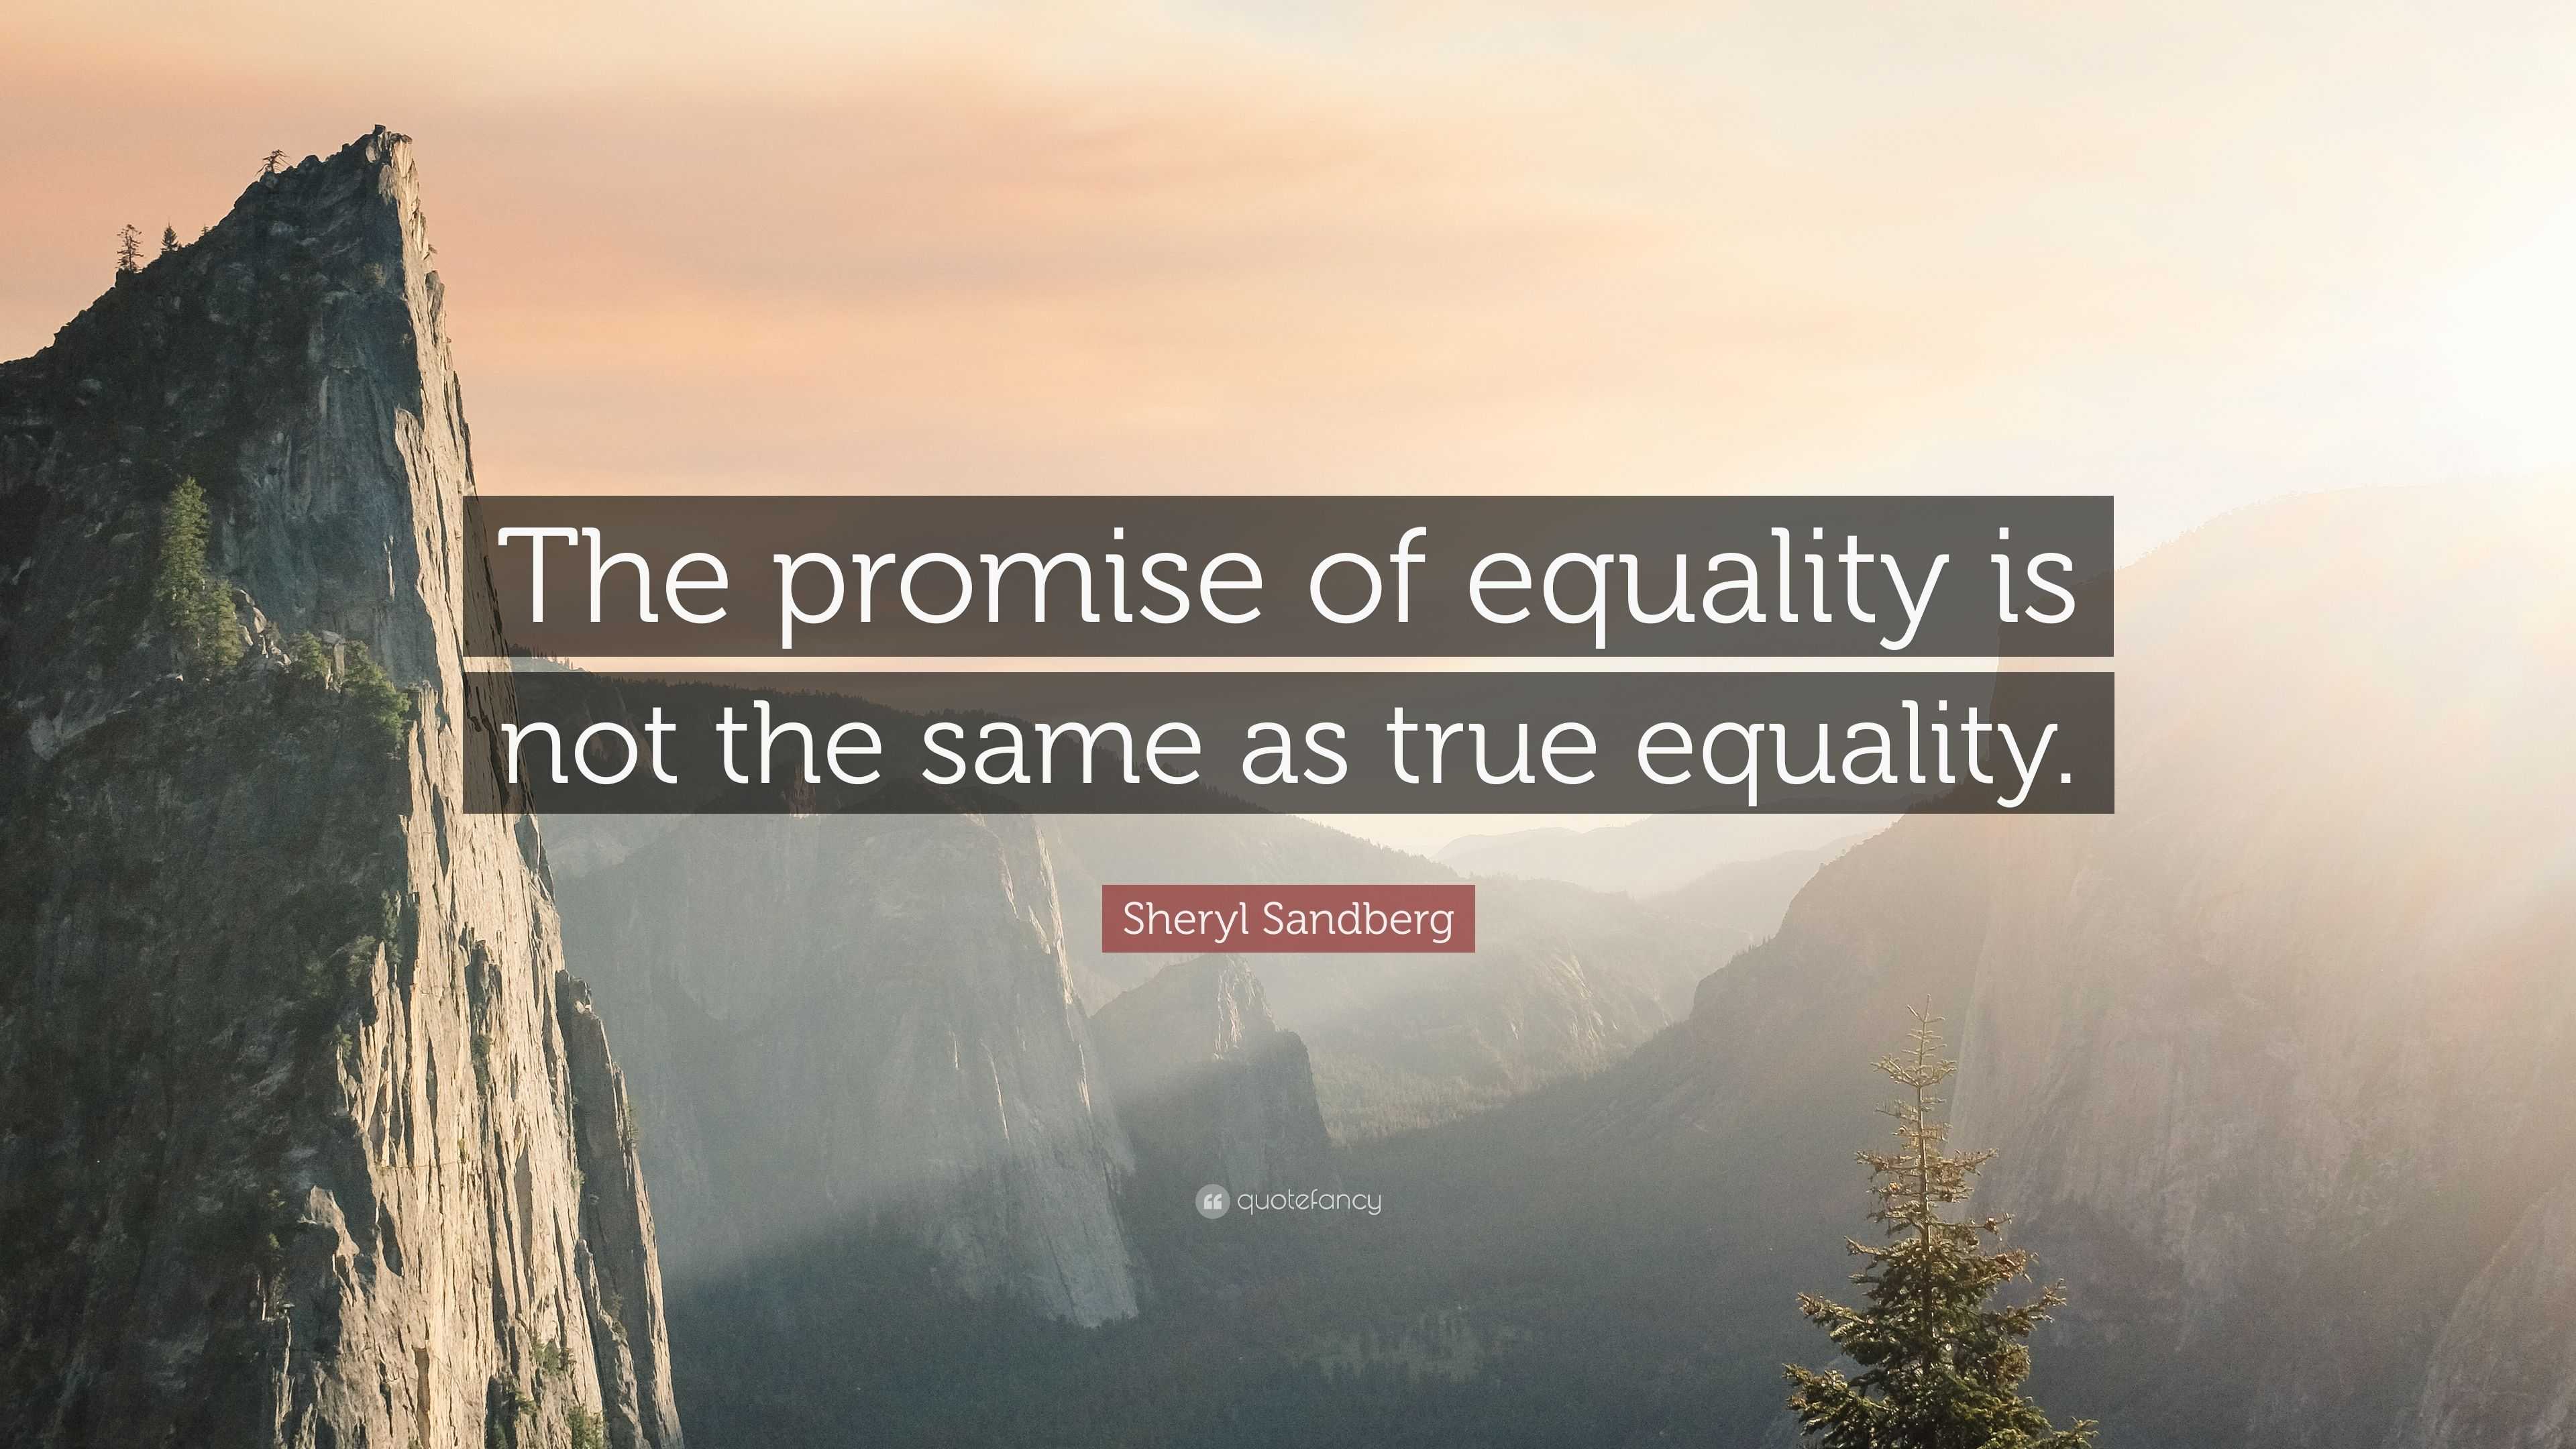 Sheryl Sandberg Quote: “The promise of equality is not the same as true